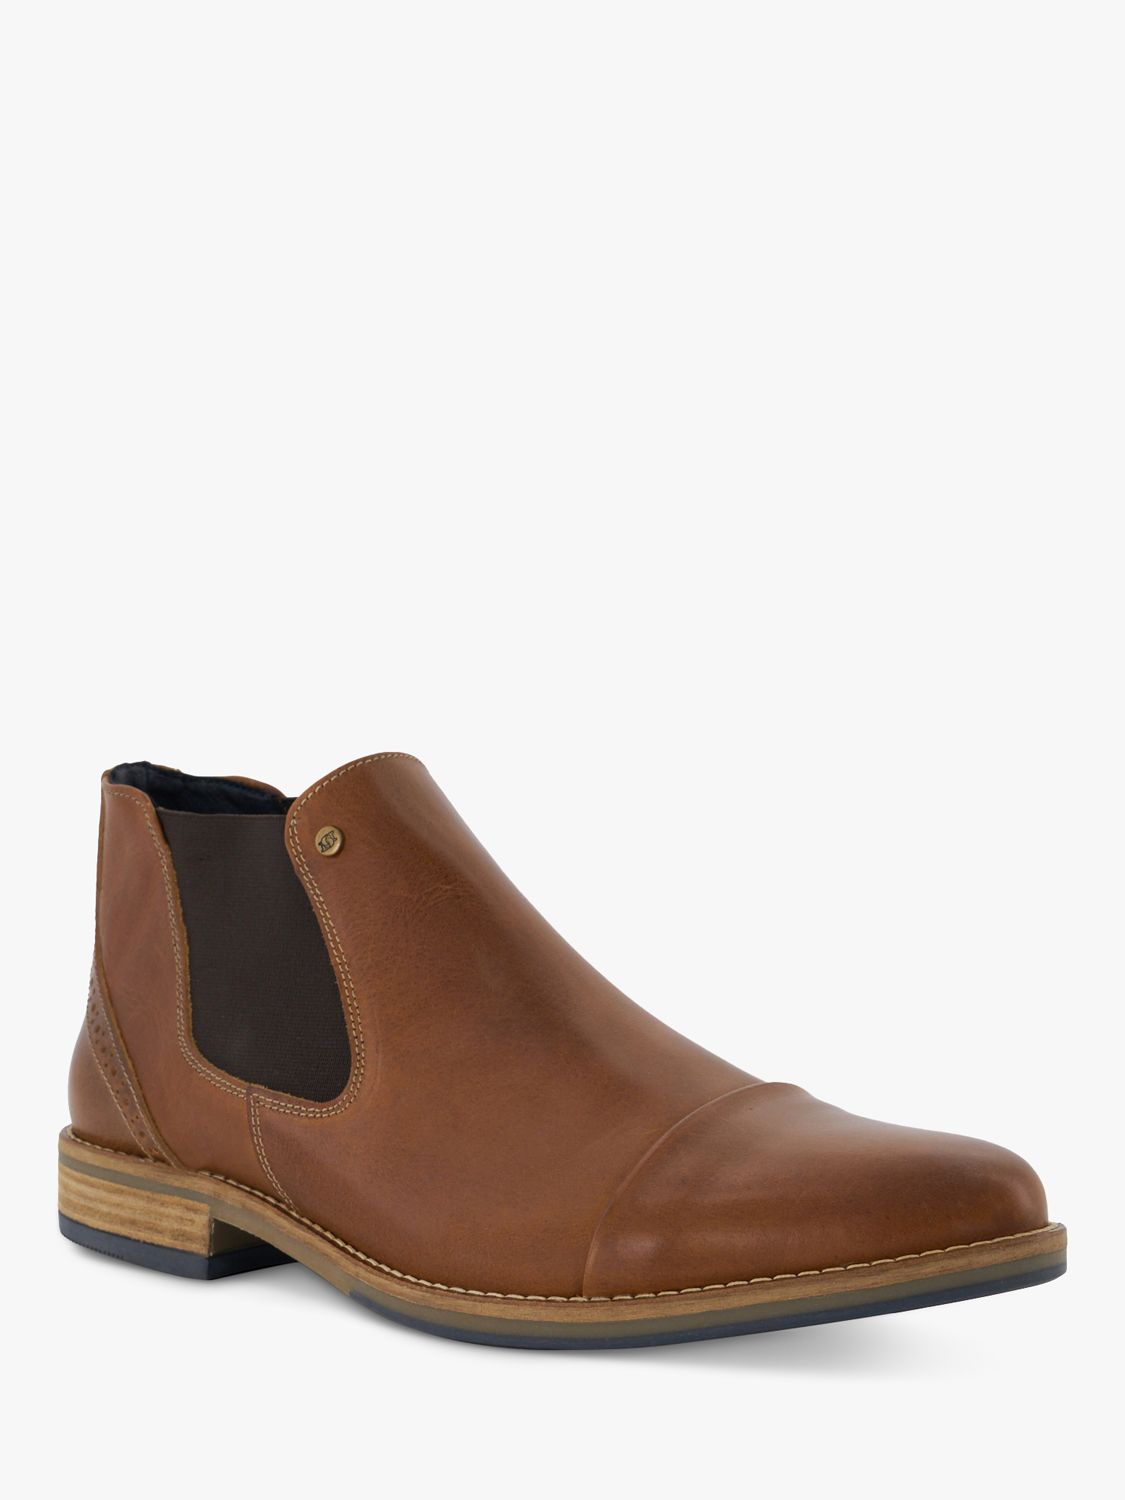 Dune Chilean Wide Fit Leather Chelsea Boots, Tan, EU40